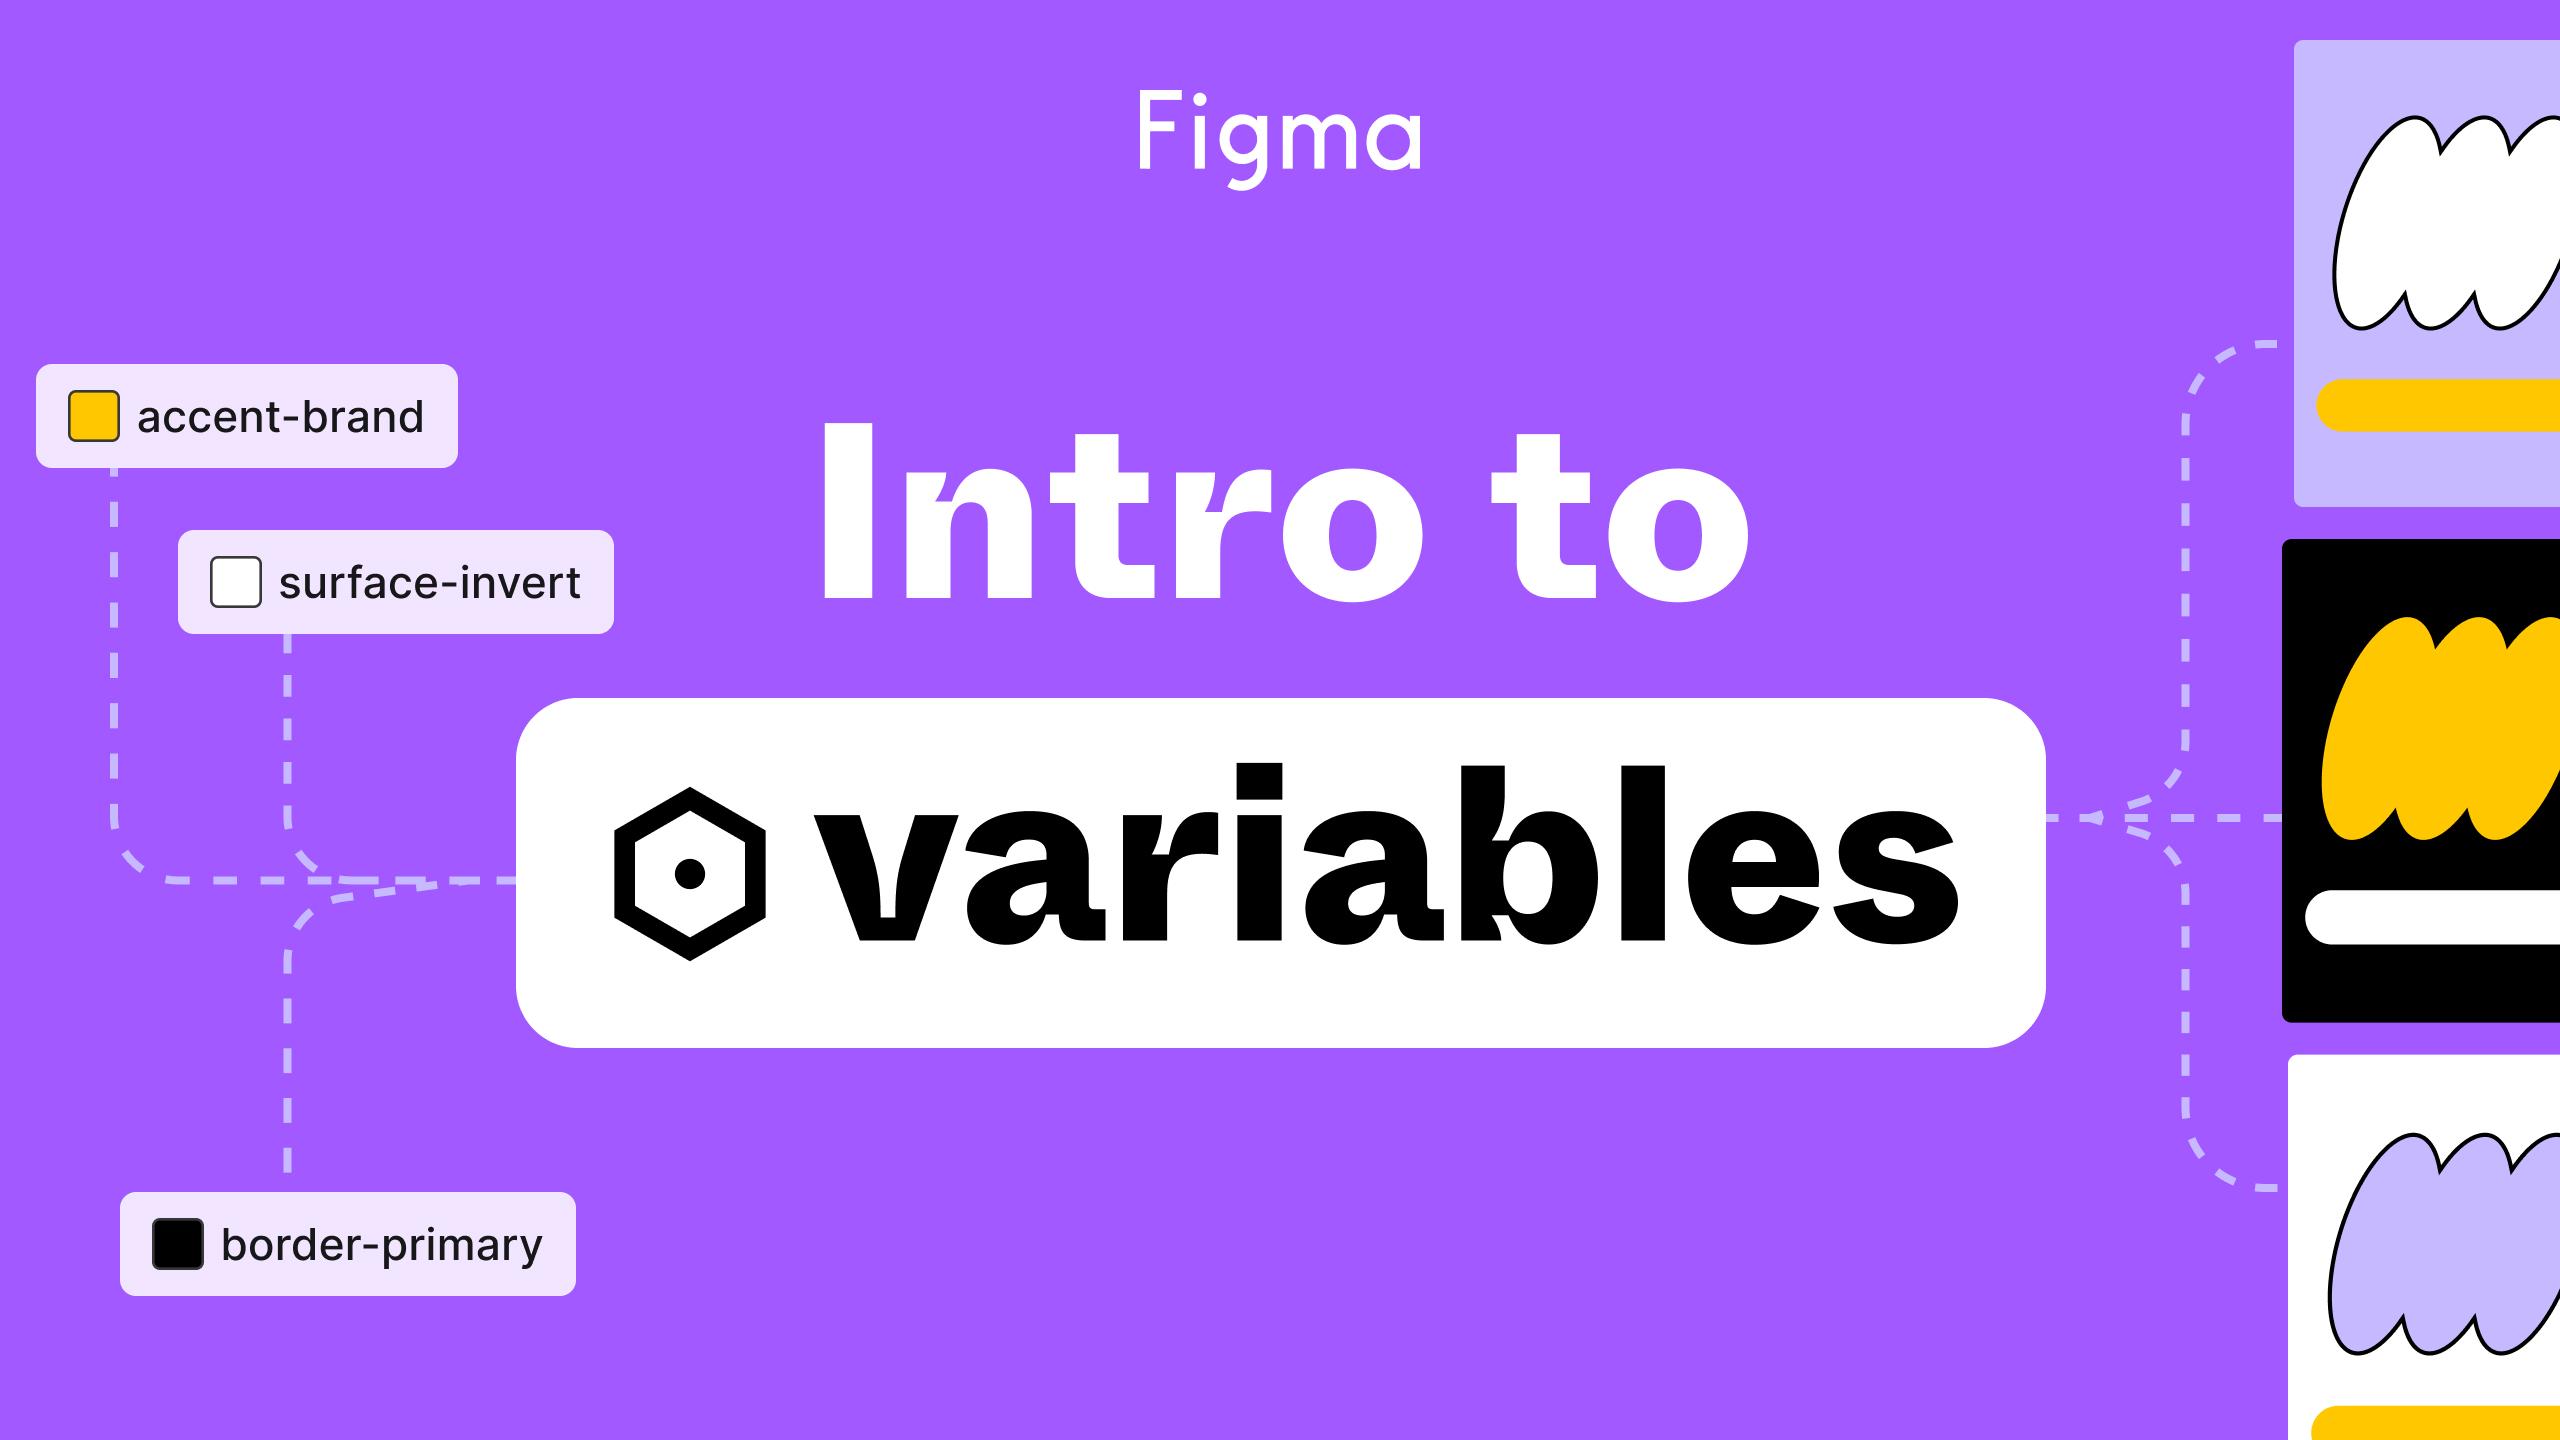 Intro to variables